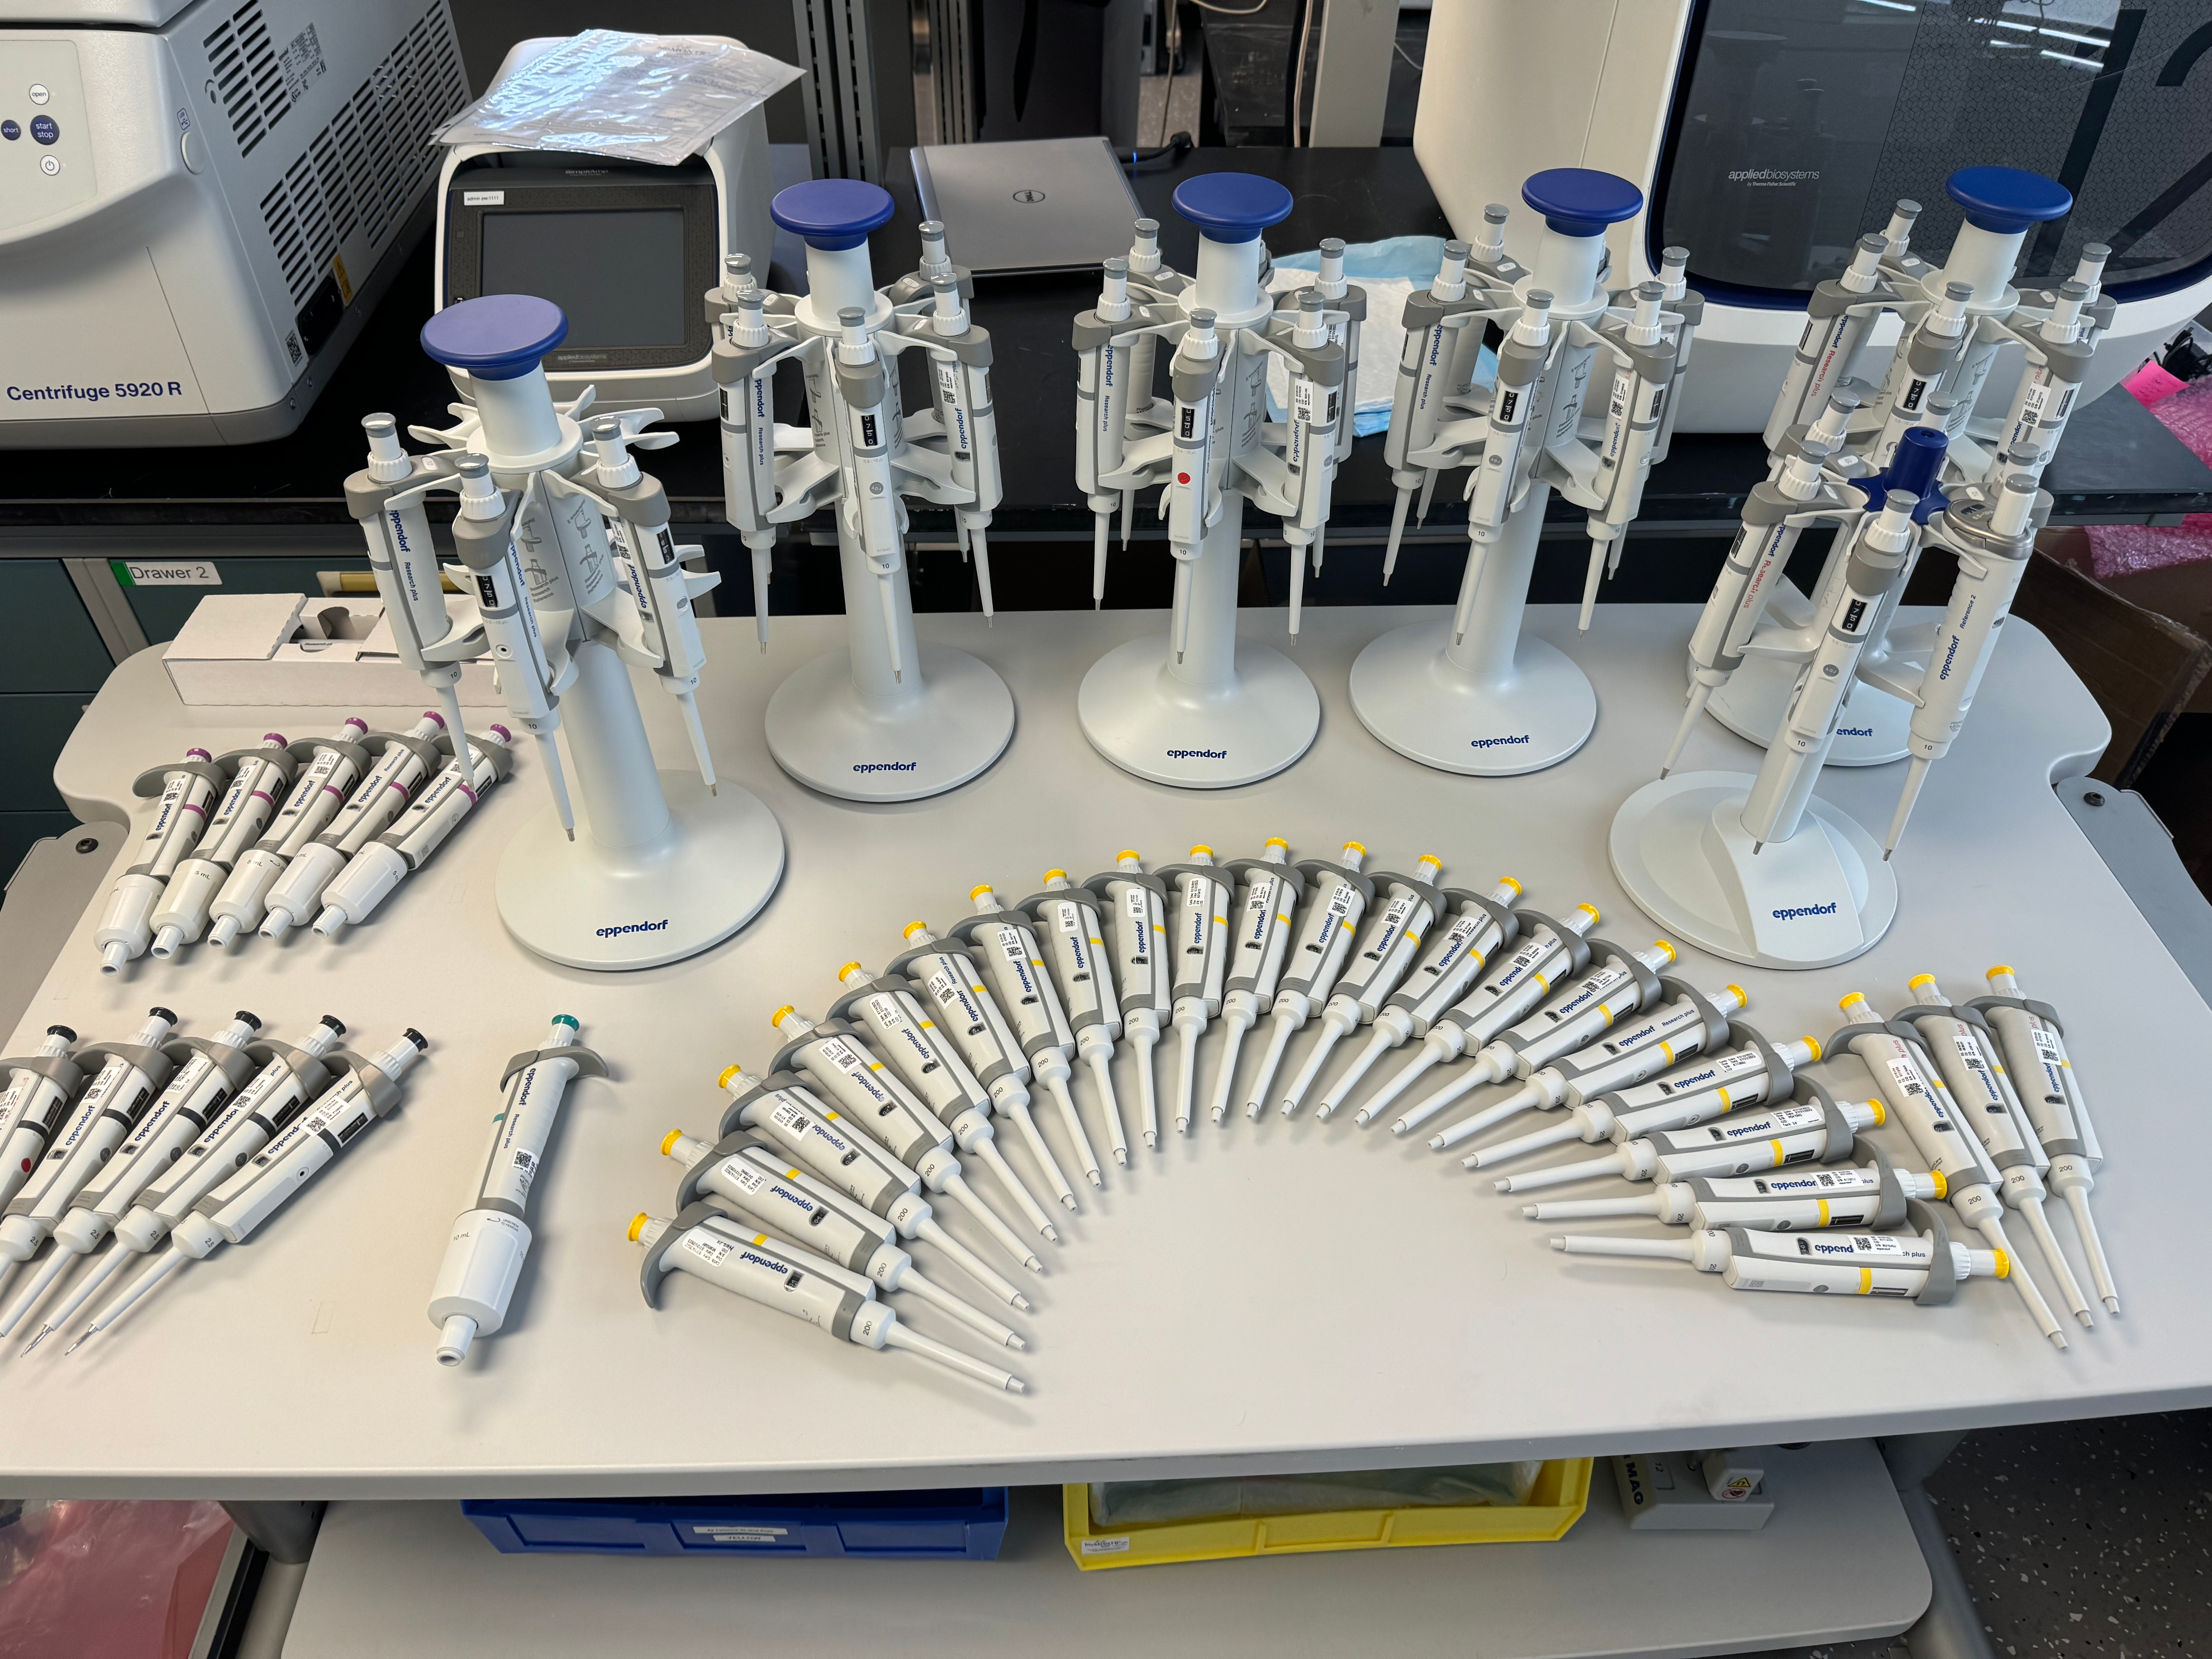 Large Lot of Eppendorf and Thermo Pipettes-Over 150 Pipettes- Incredible offer!